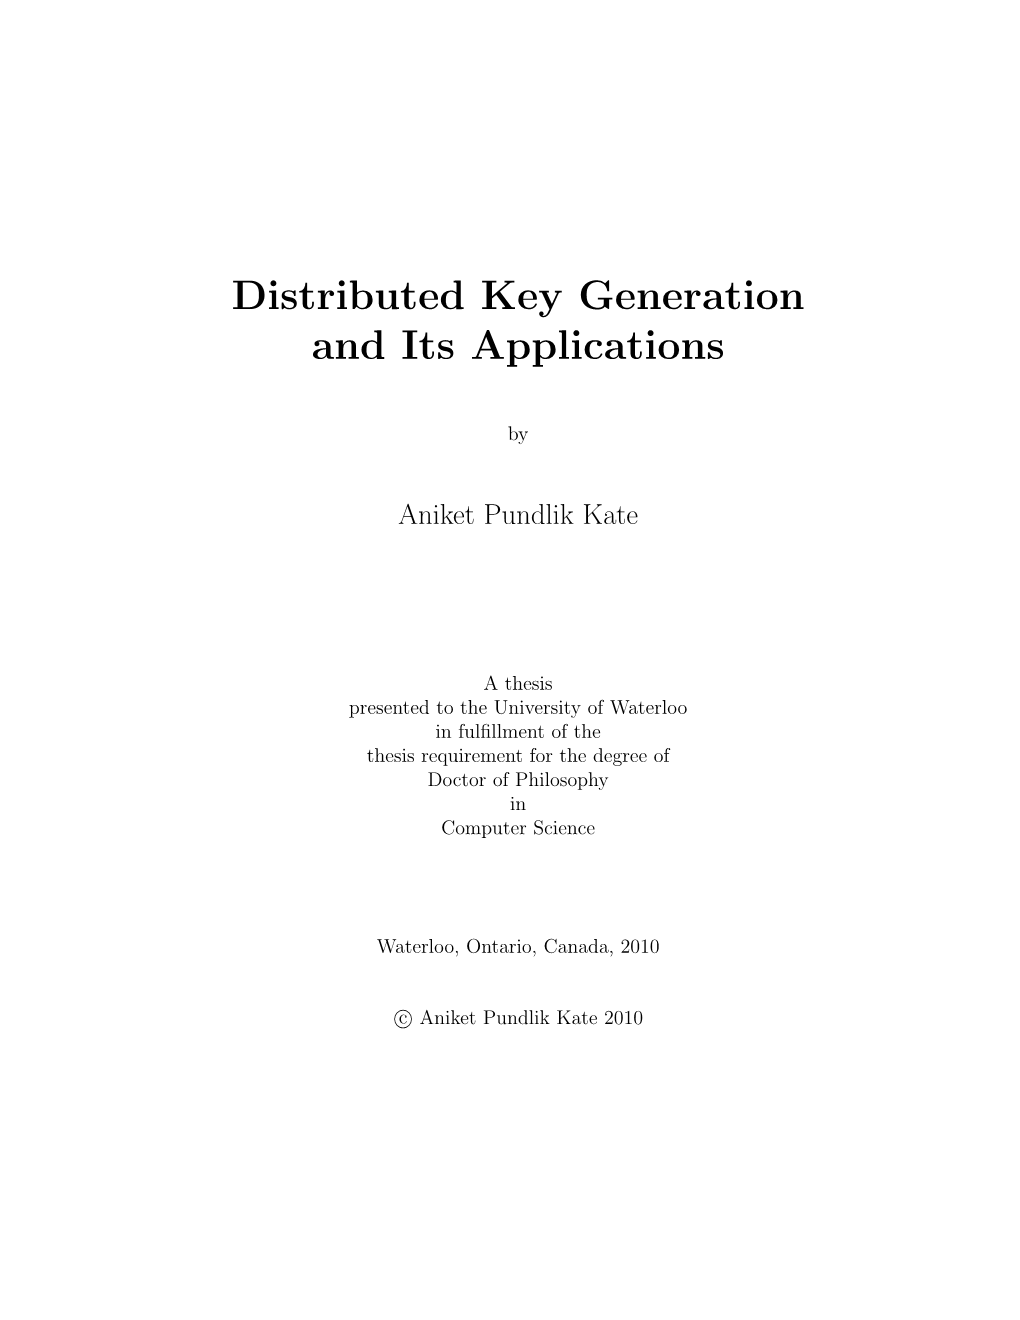 Distributed Key Generation and Its Applications